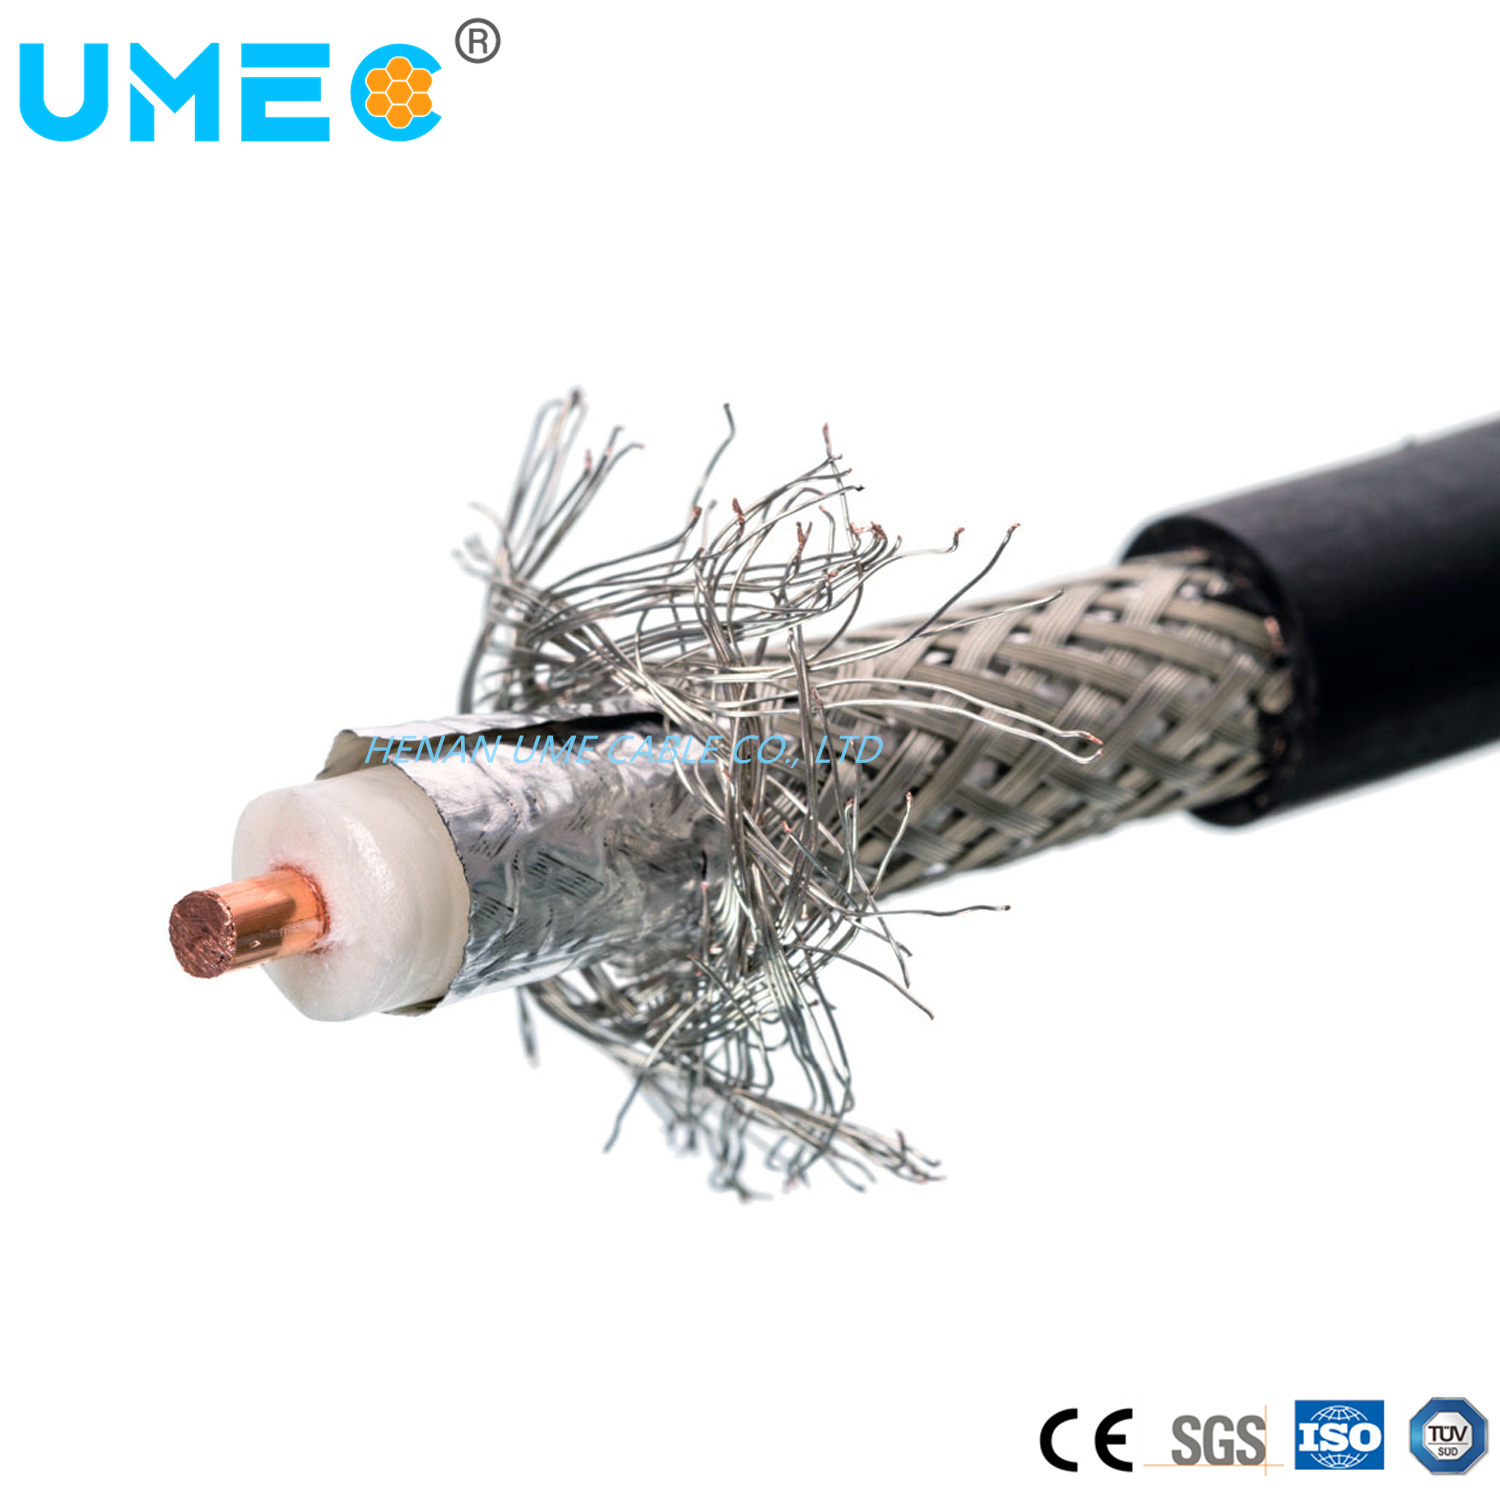 FEP Copper Wire 50 Ohm Coaxial Cable Price for Surveillance Video Rg59 Rg58 Communication Coaxial Wires and Cables